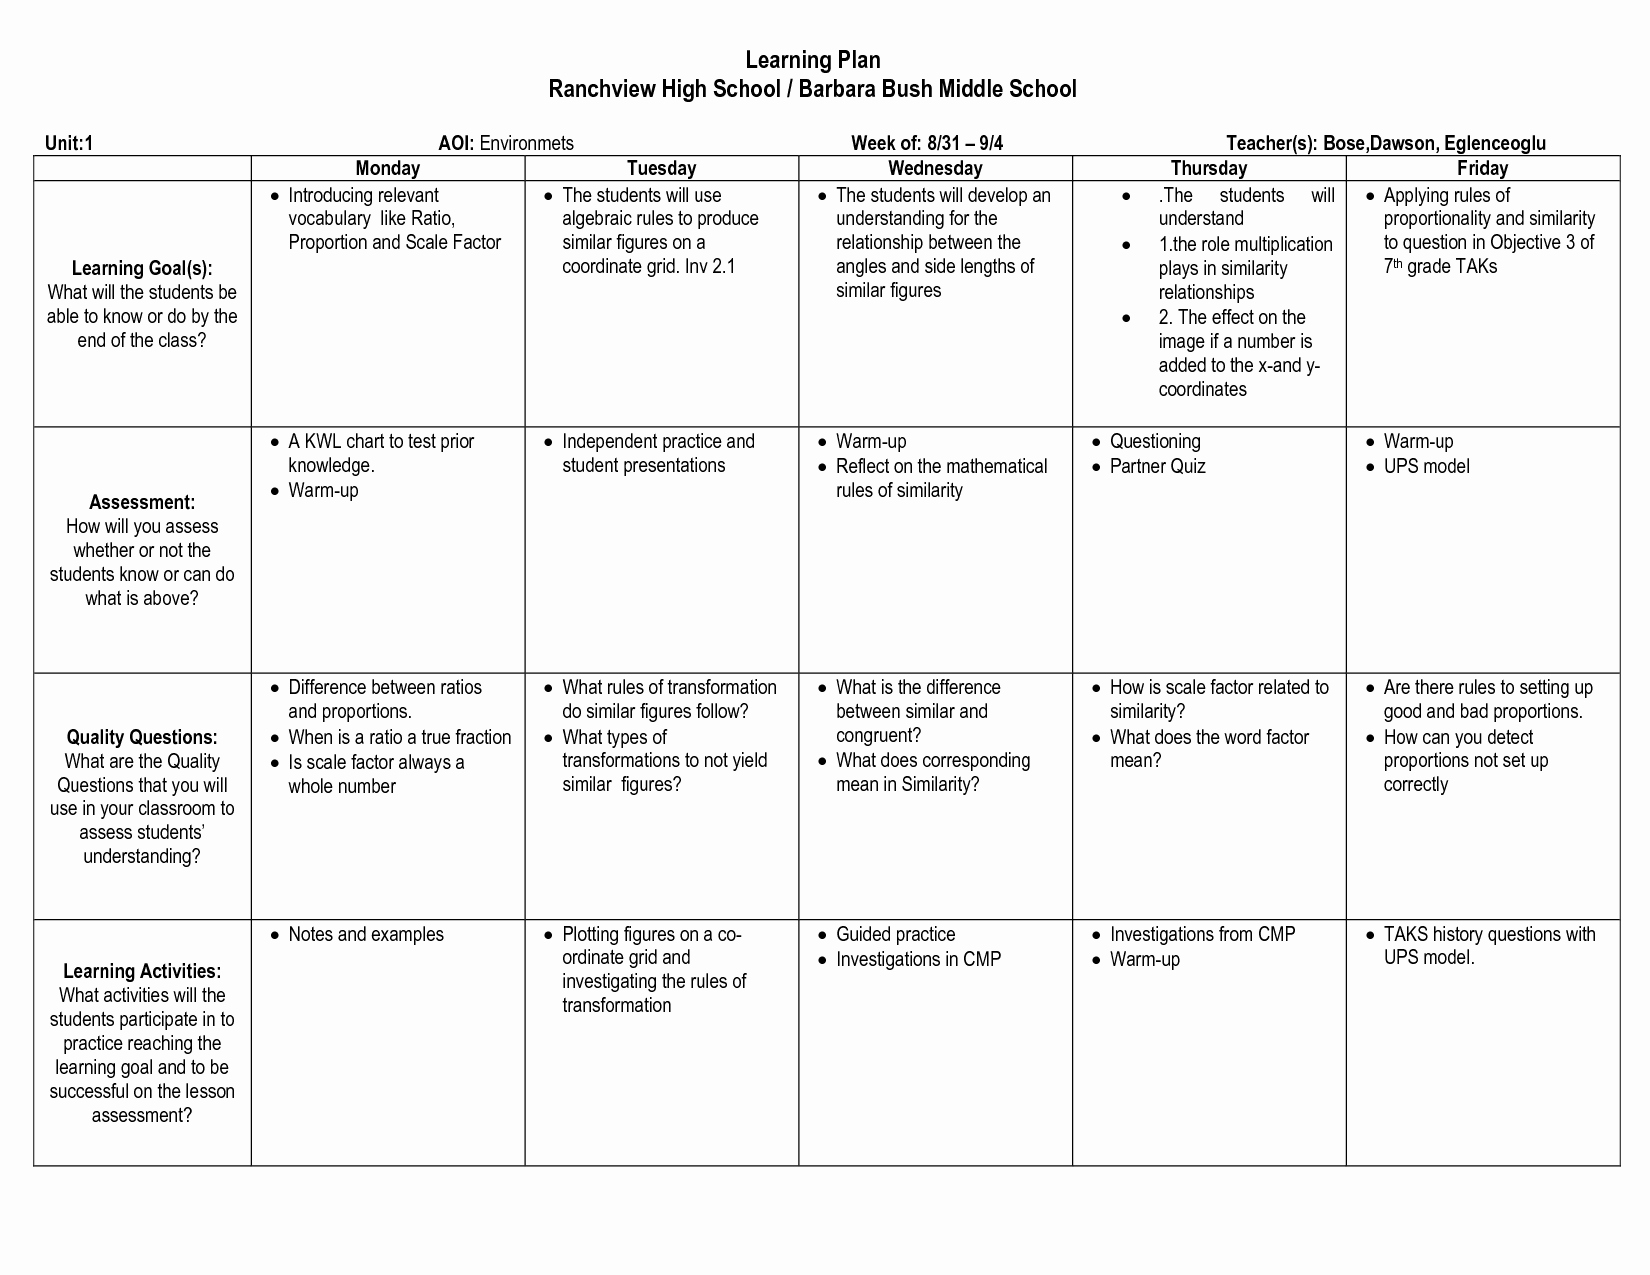 Personal Learning Plan Template Lovely Student Learning Plan Templates